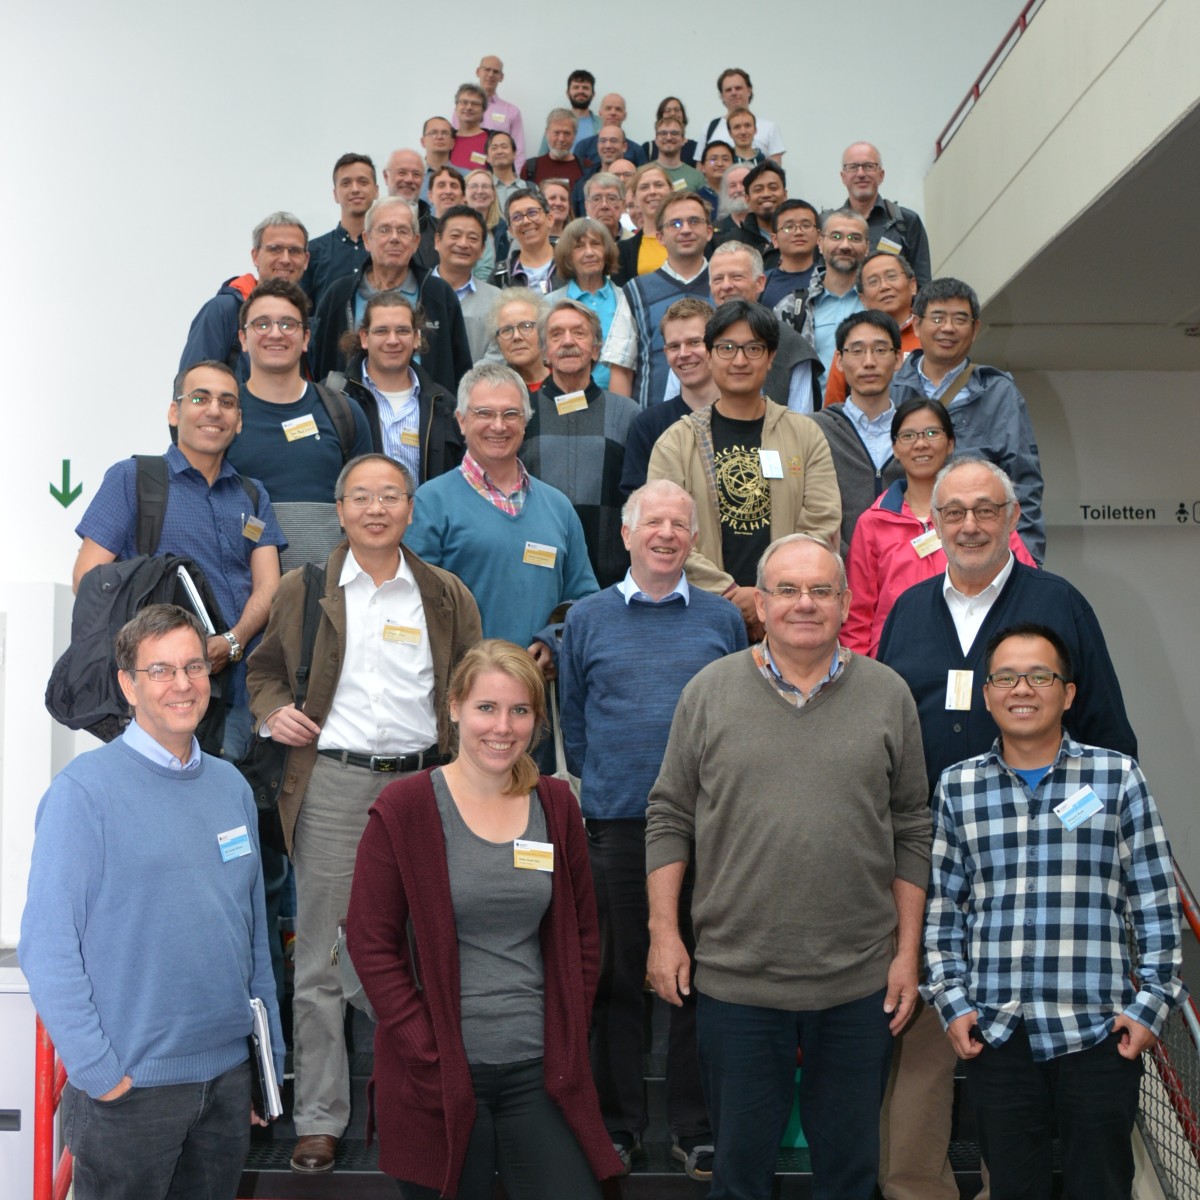 Participants of the Workshop Representation Theory in Bielefeld – Past and Future